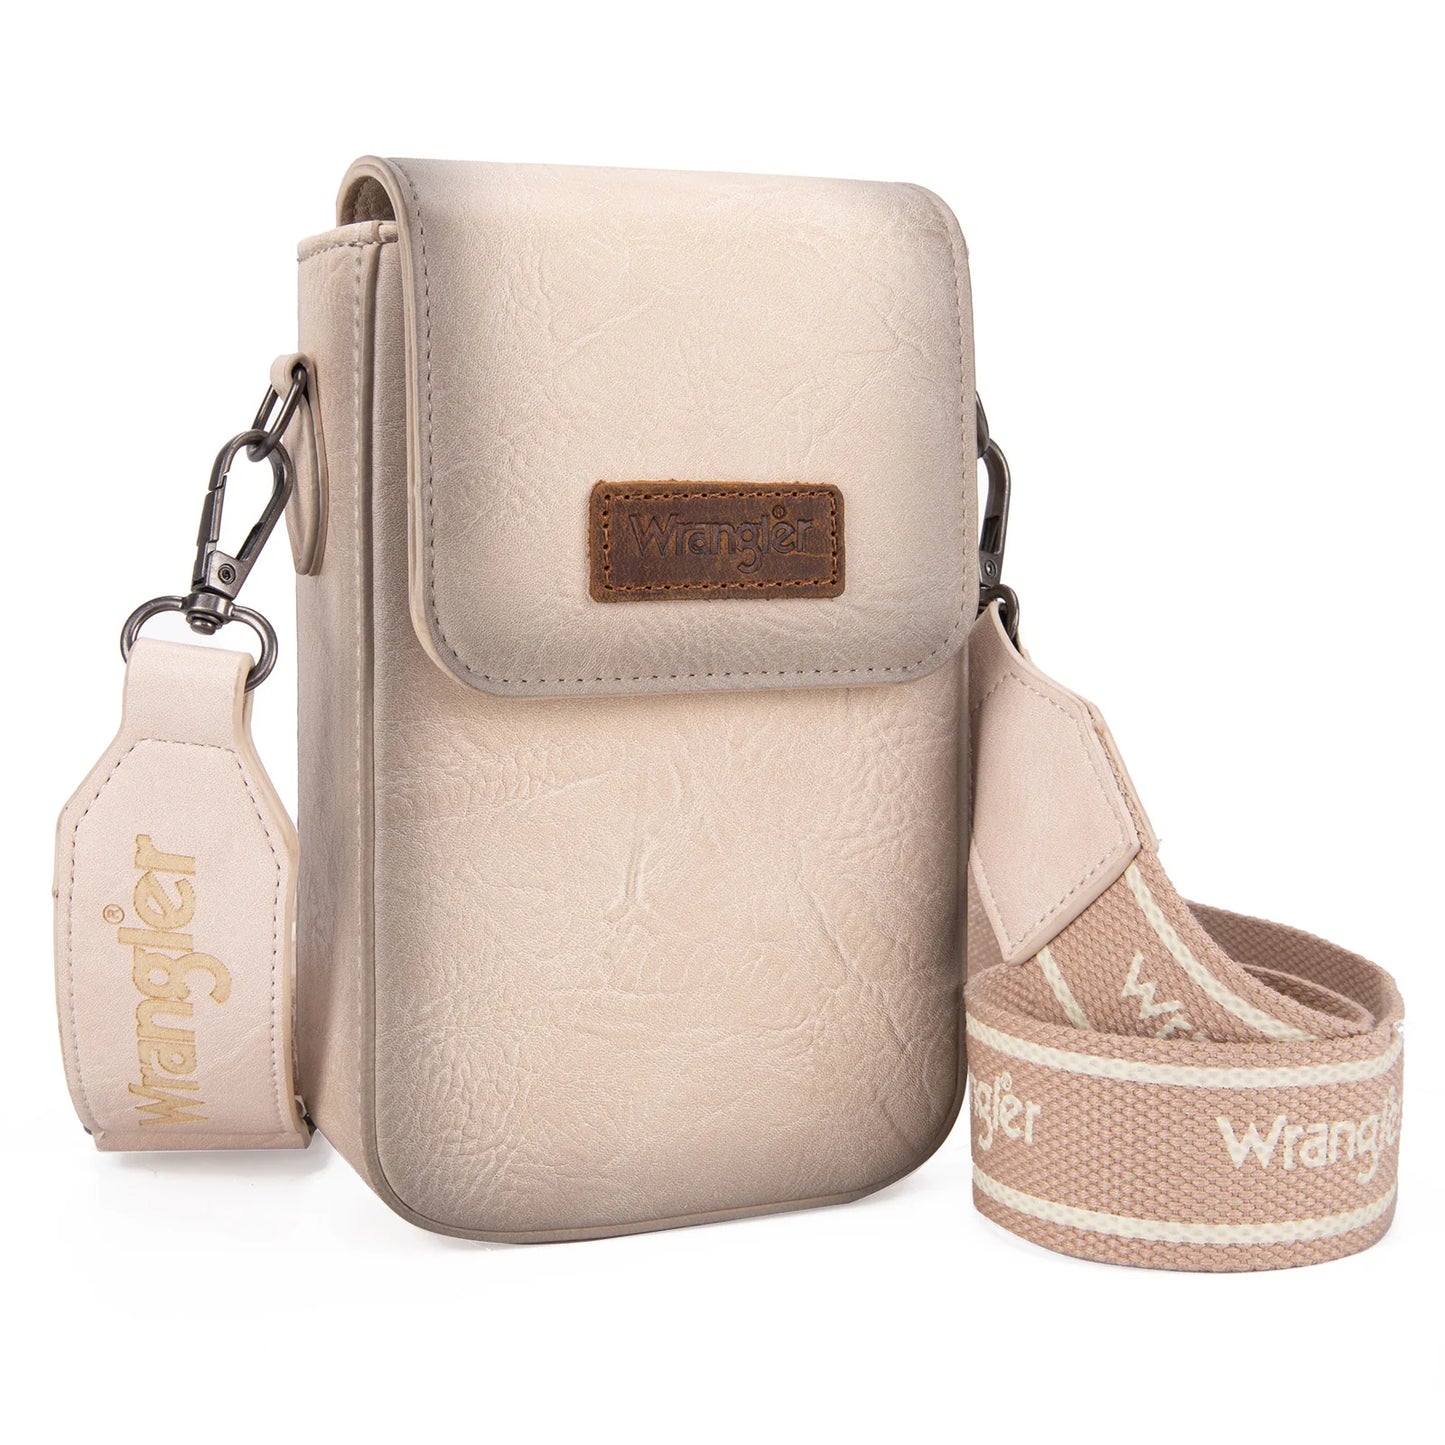 Wrangler Crossbody Cell Phone Purse With Back Card Slots (Assorted)